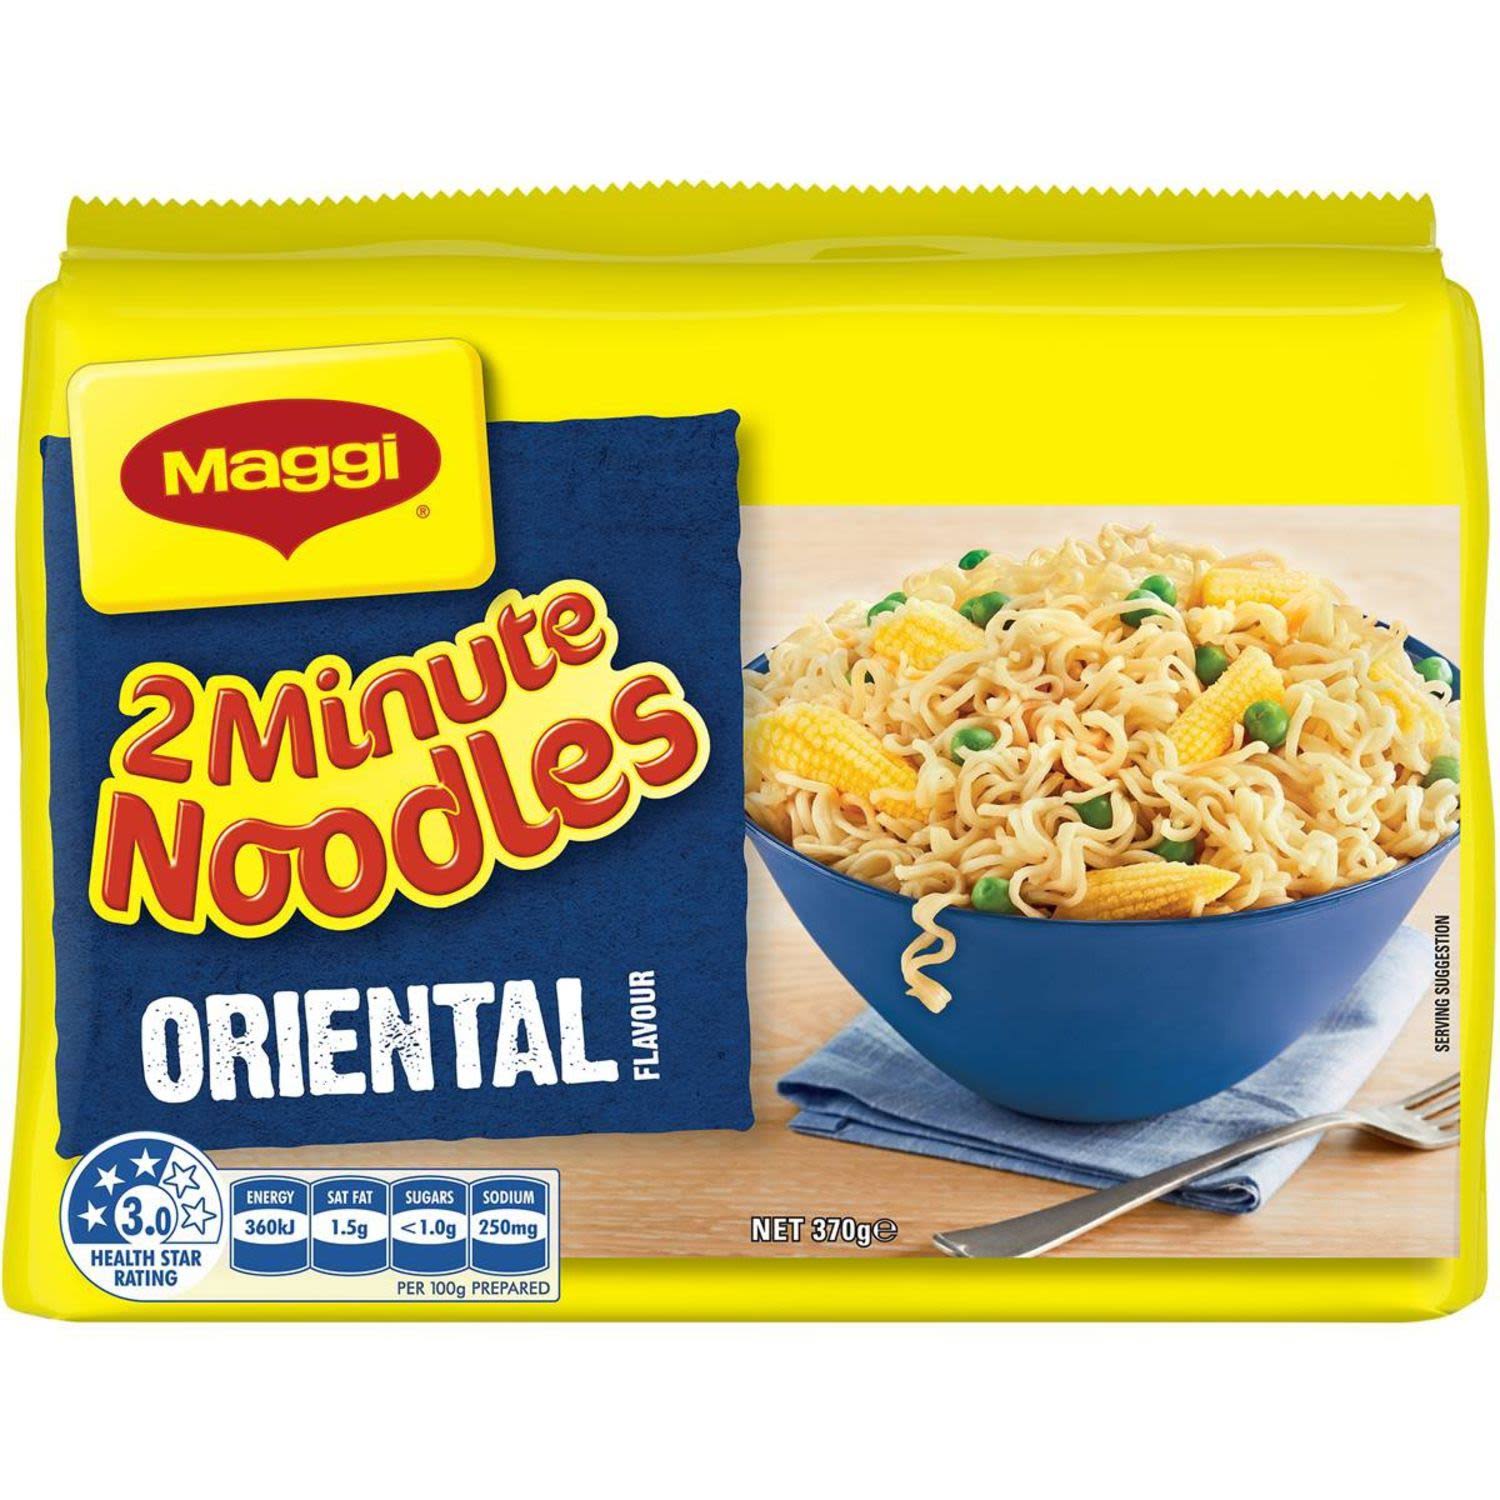 Maggi 2 Minute Noodles Oriental 5 Pack